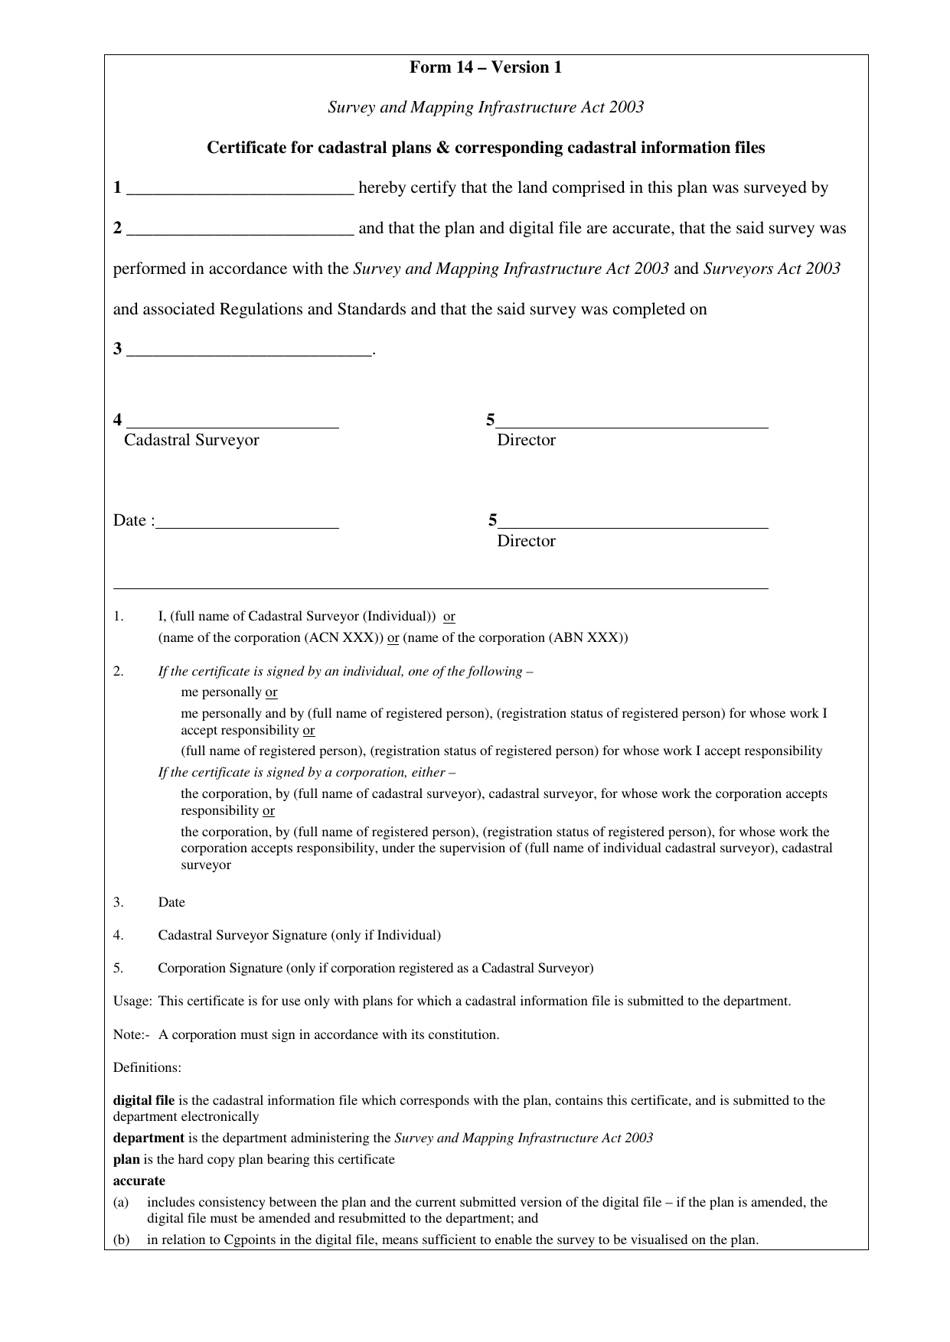 Form 14 Certificate for Cadastral Plans  Corresponding Cadastral Information Files - Queensland, Australia, Page 1